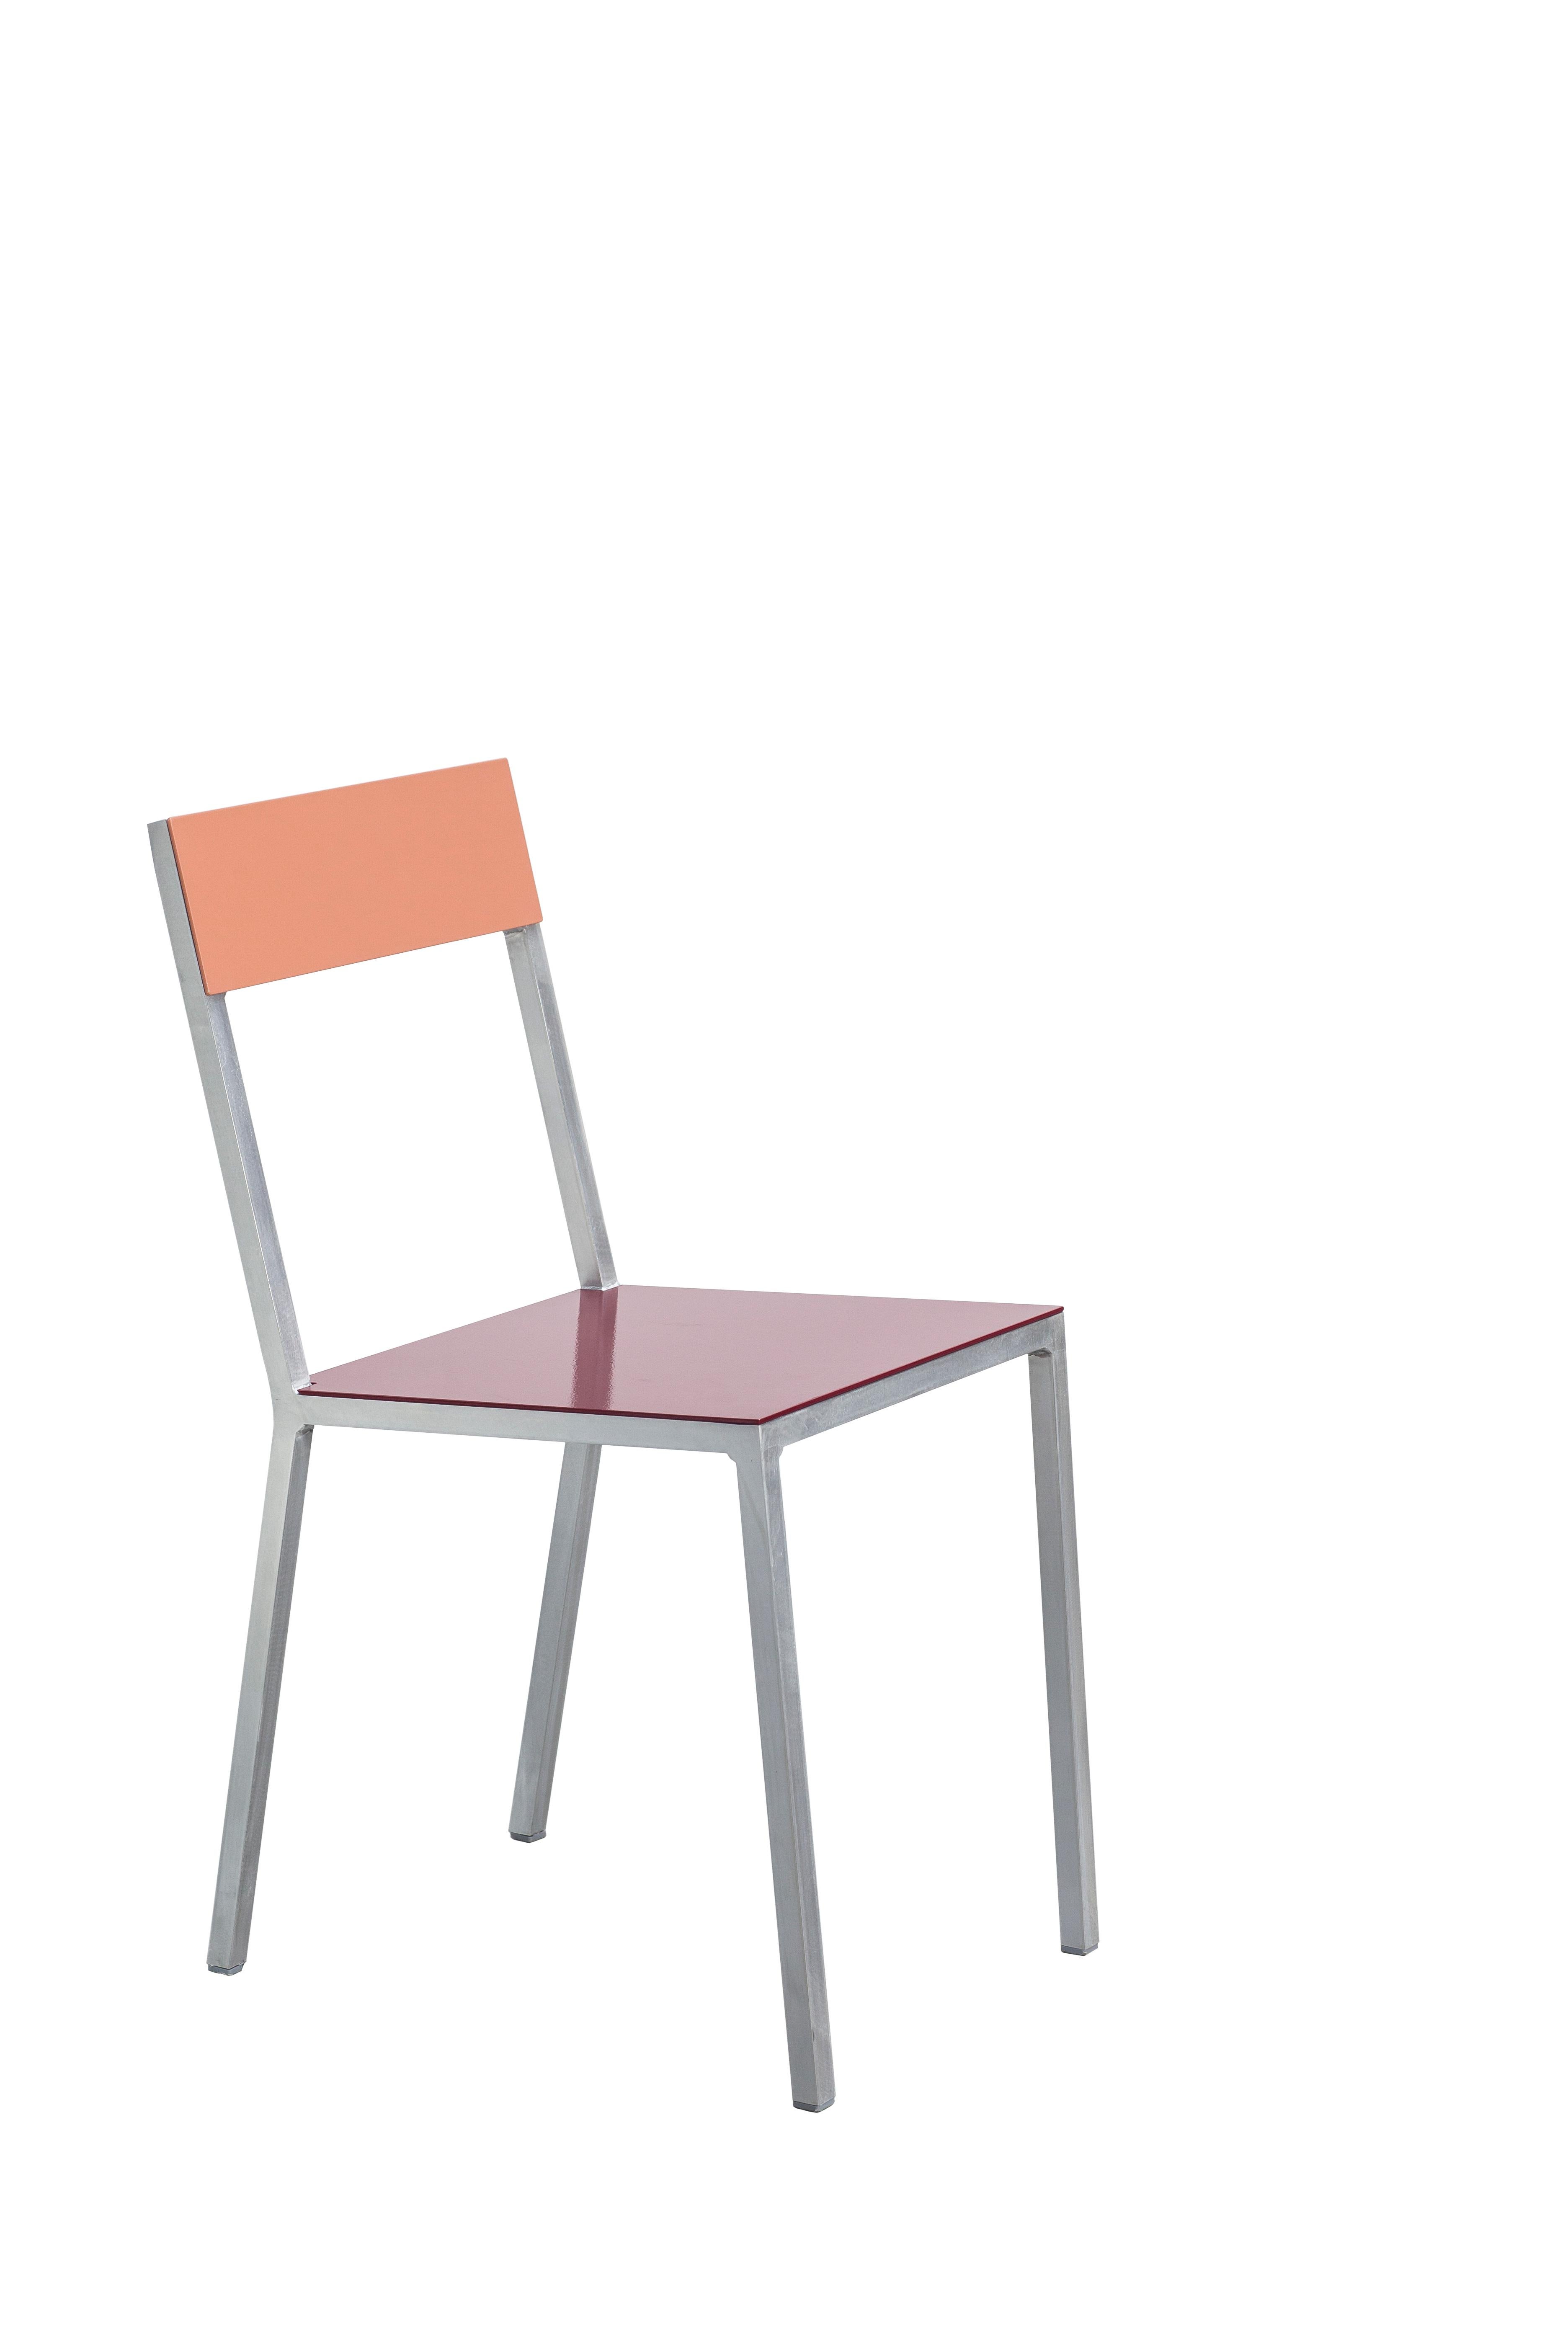 Aluminum Contemporary Chair 'ALU' by Muller Van Severen x Valerie Objetcs, Red + Curry For Sale